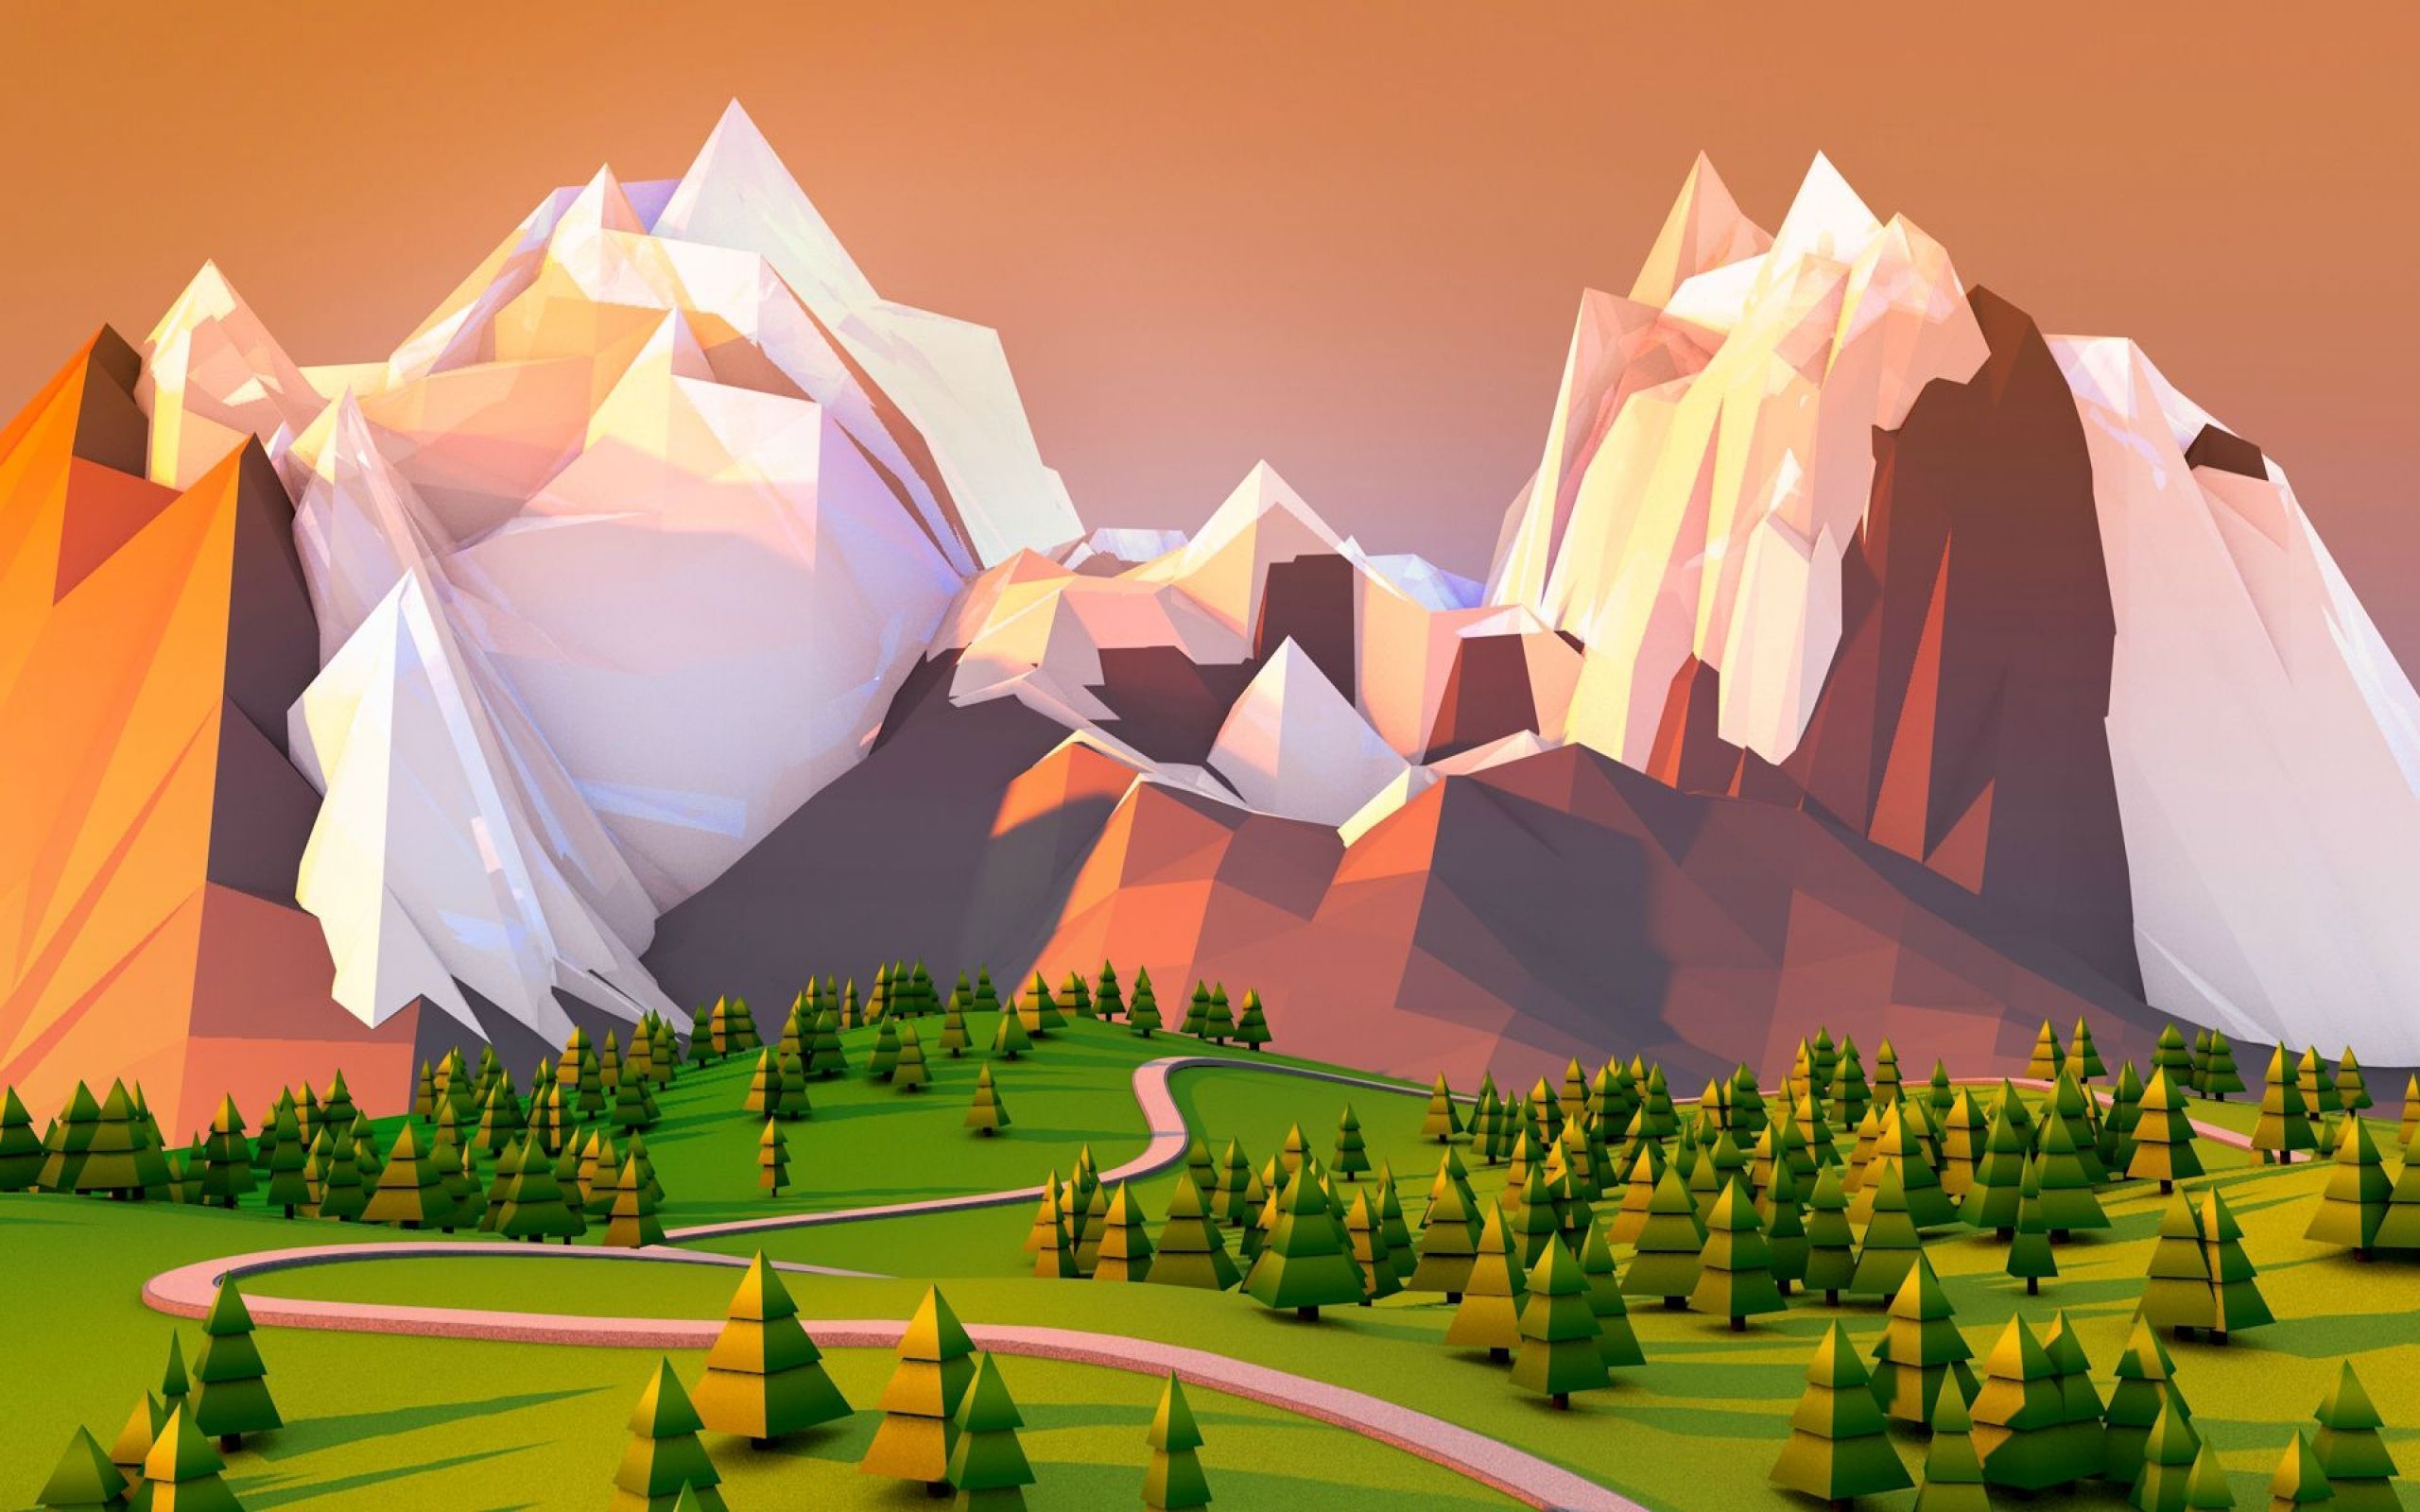 Low Poly Landscape Wallpapers - Wallpaper Cave